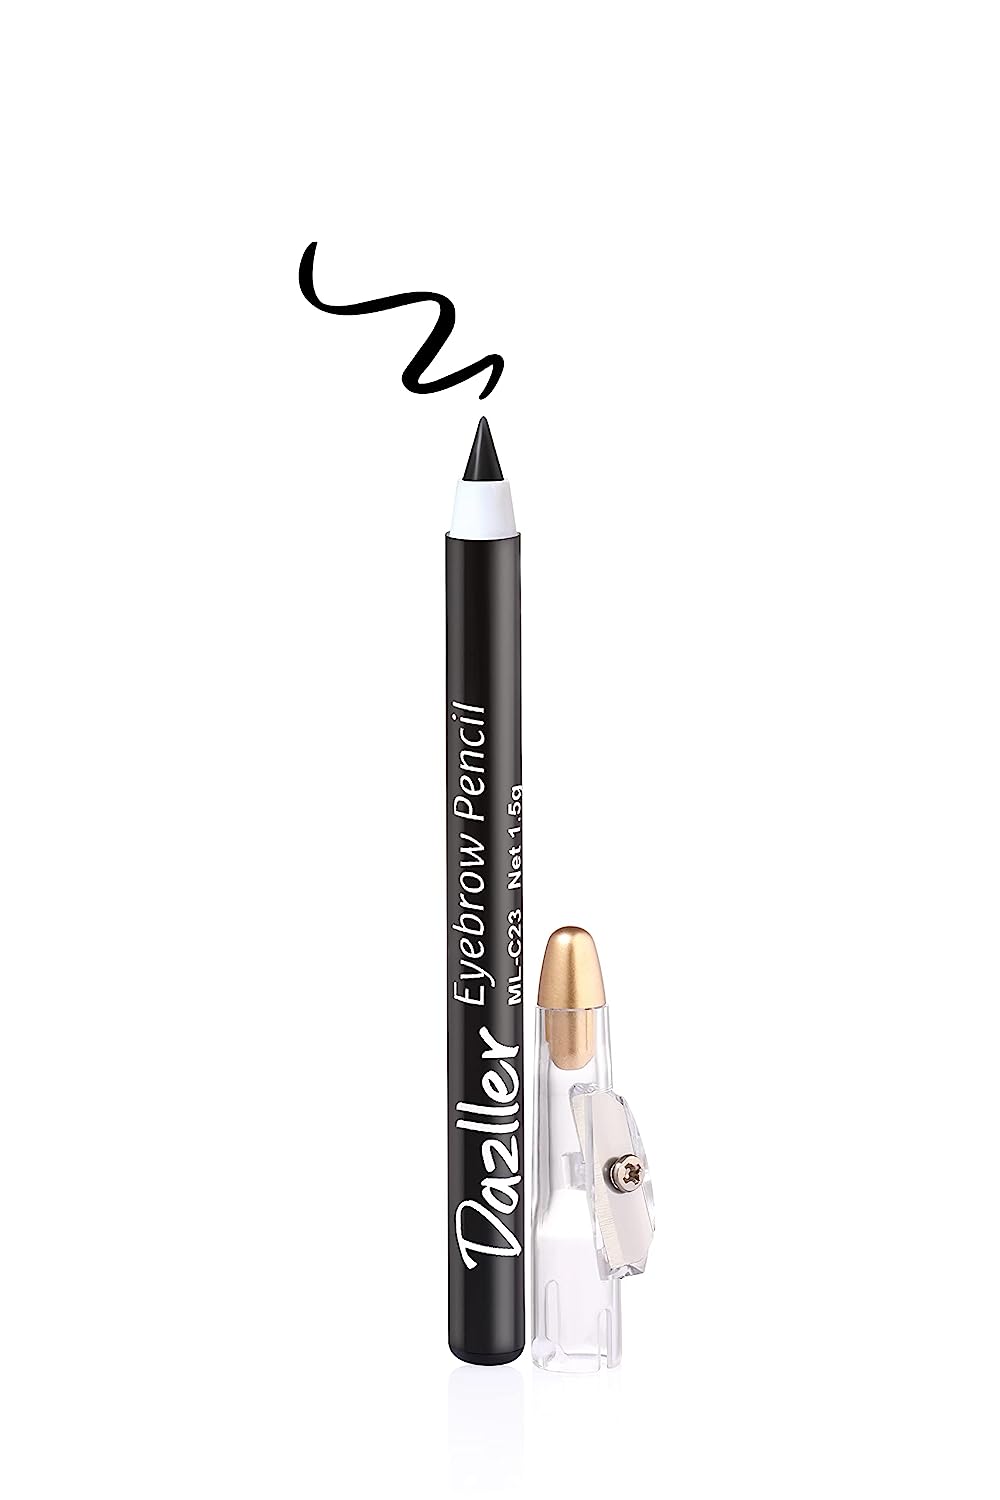 Dazller Eyebrow Pencil Precision Eyebrow Pencil with Creamy Wax Formula, Earthen Pigments, Long-lasting Stay up to 8 Hours, Vegan & Cruelty-free 1.5g-Black